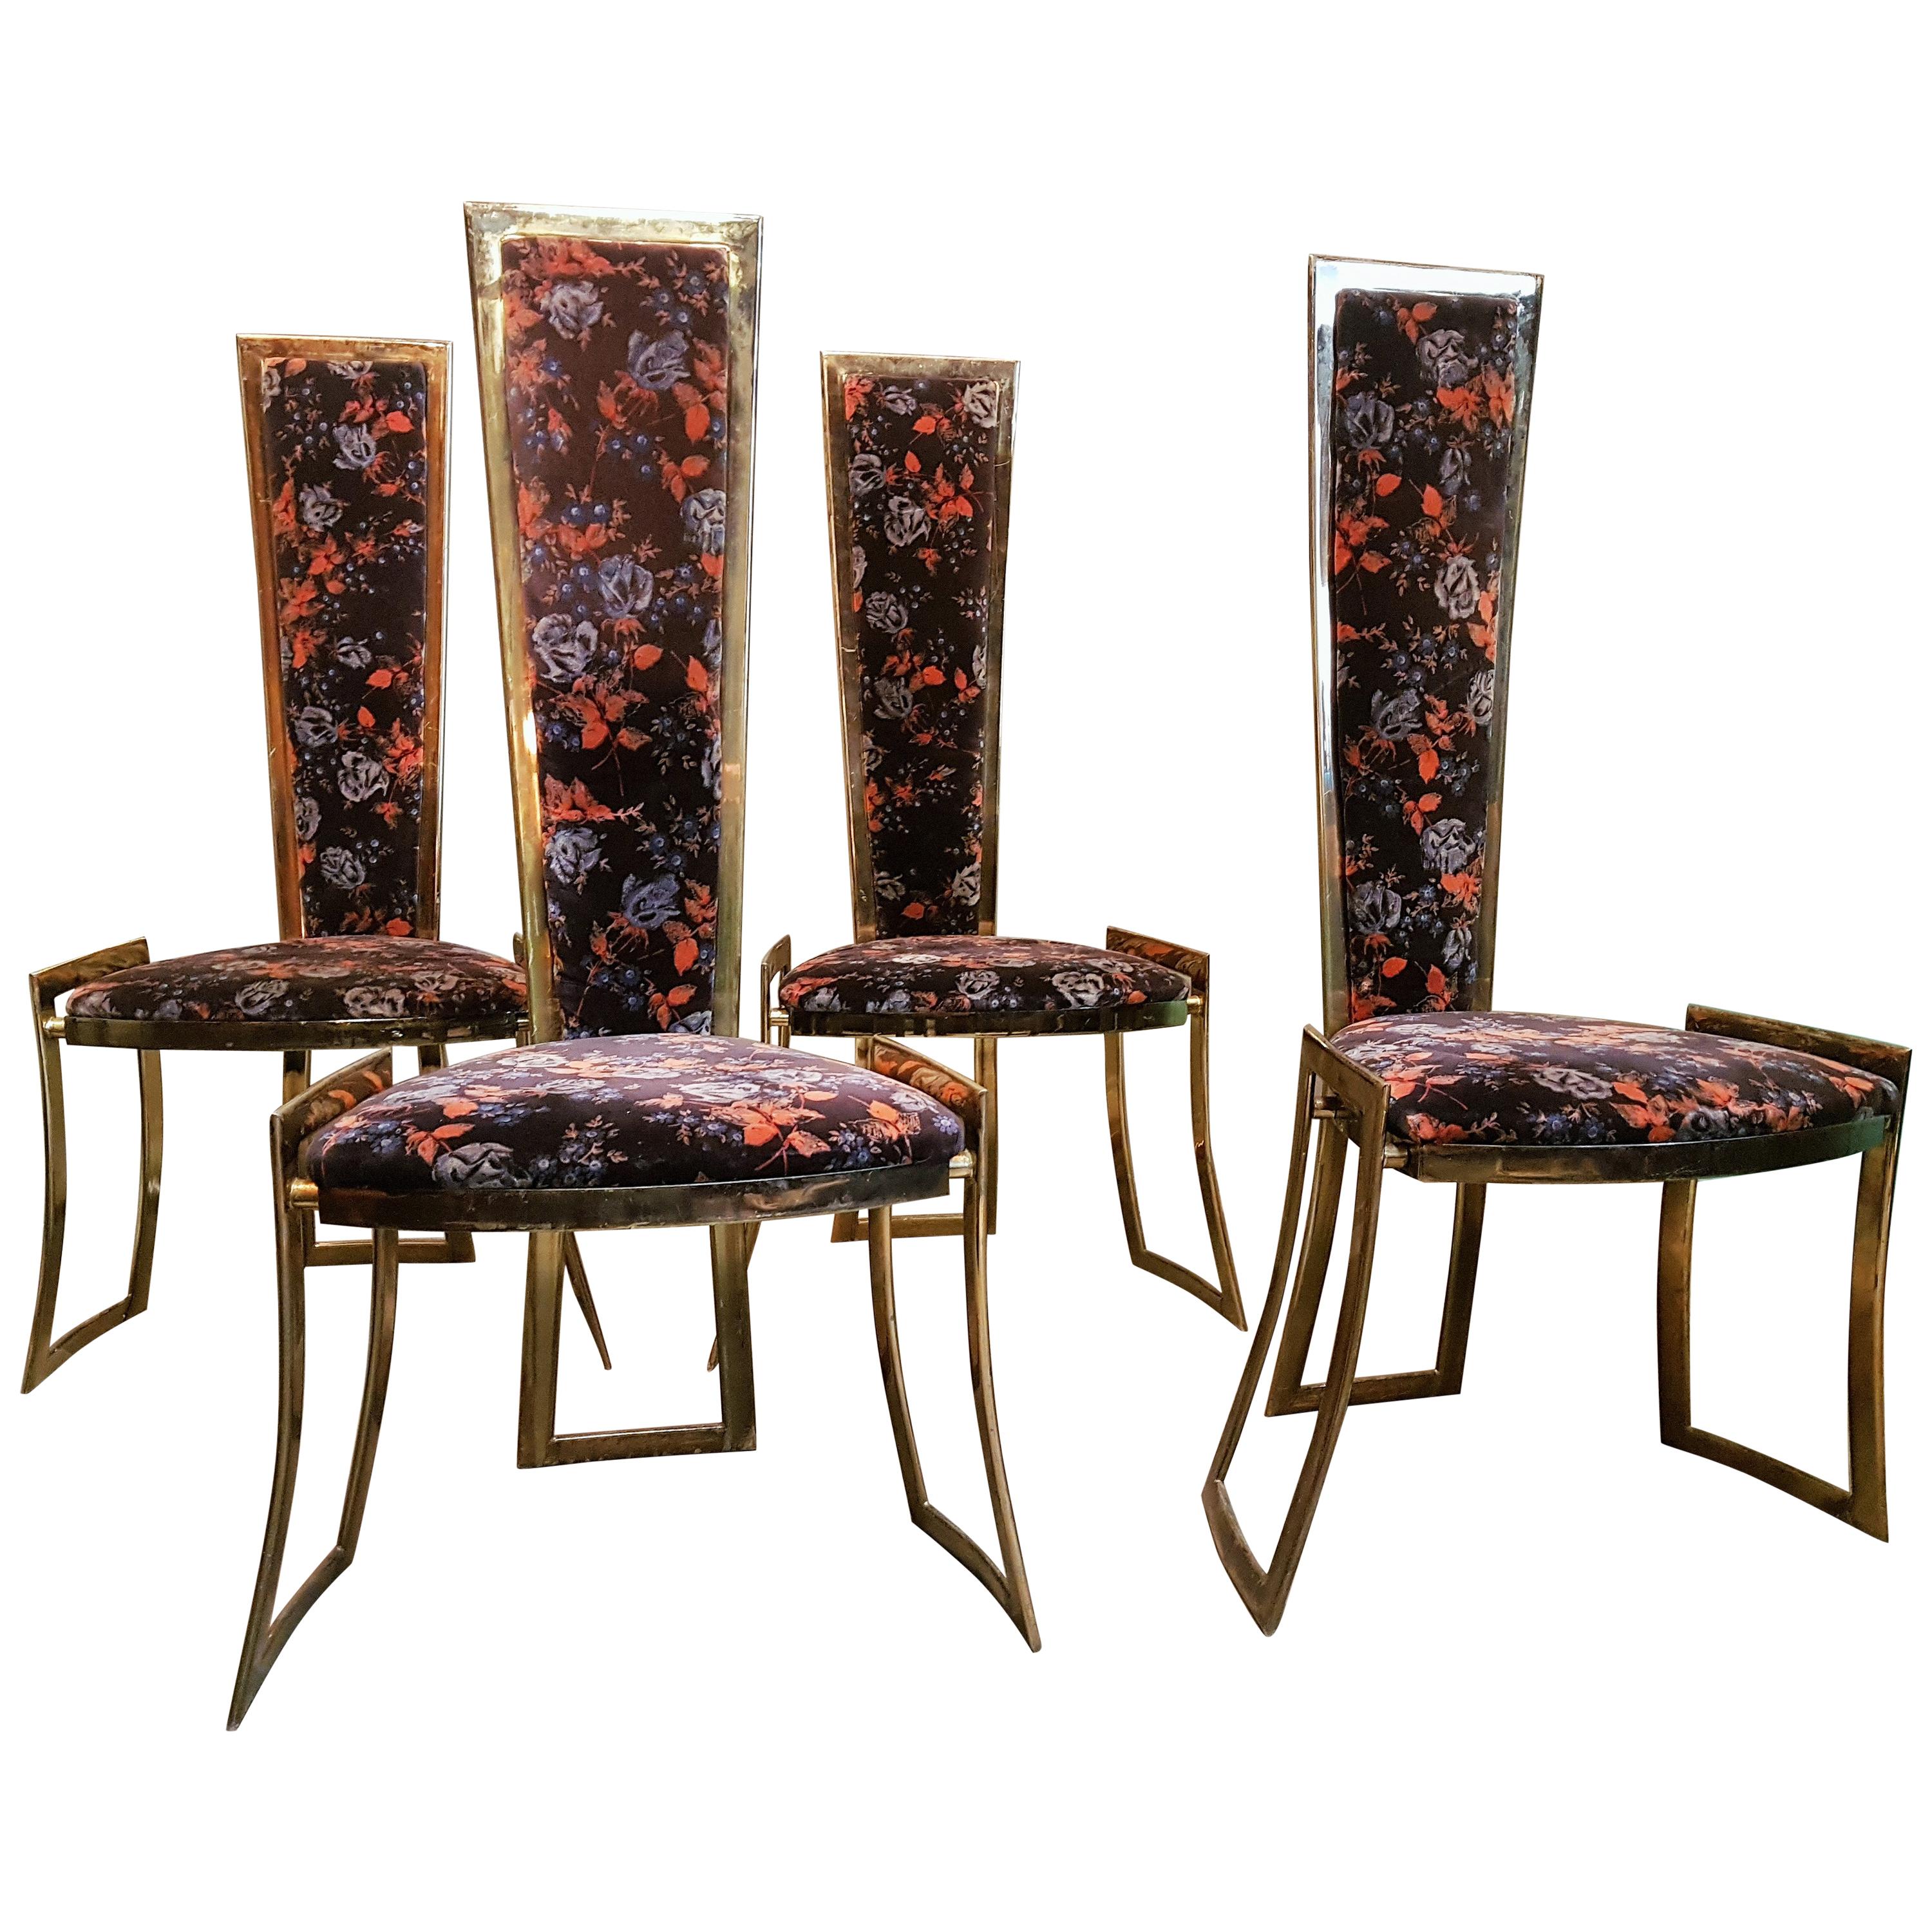 Midcentury High Back Brass Chairs Style Rizzo Hollywood Regency, France 1960s For Sale